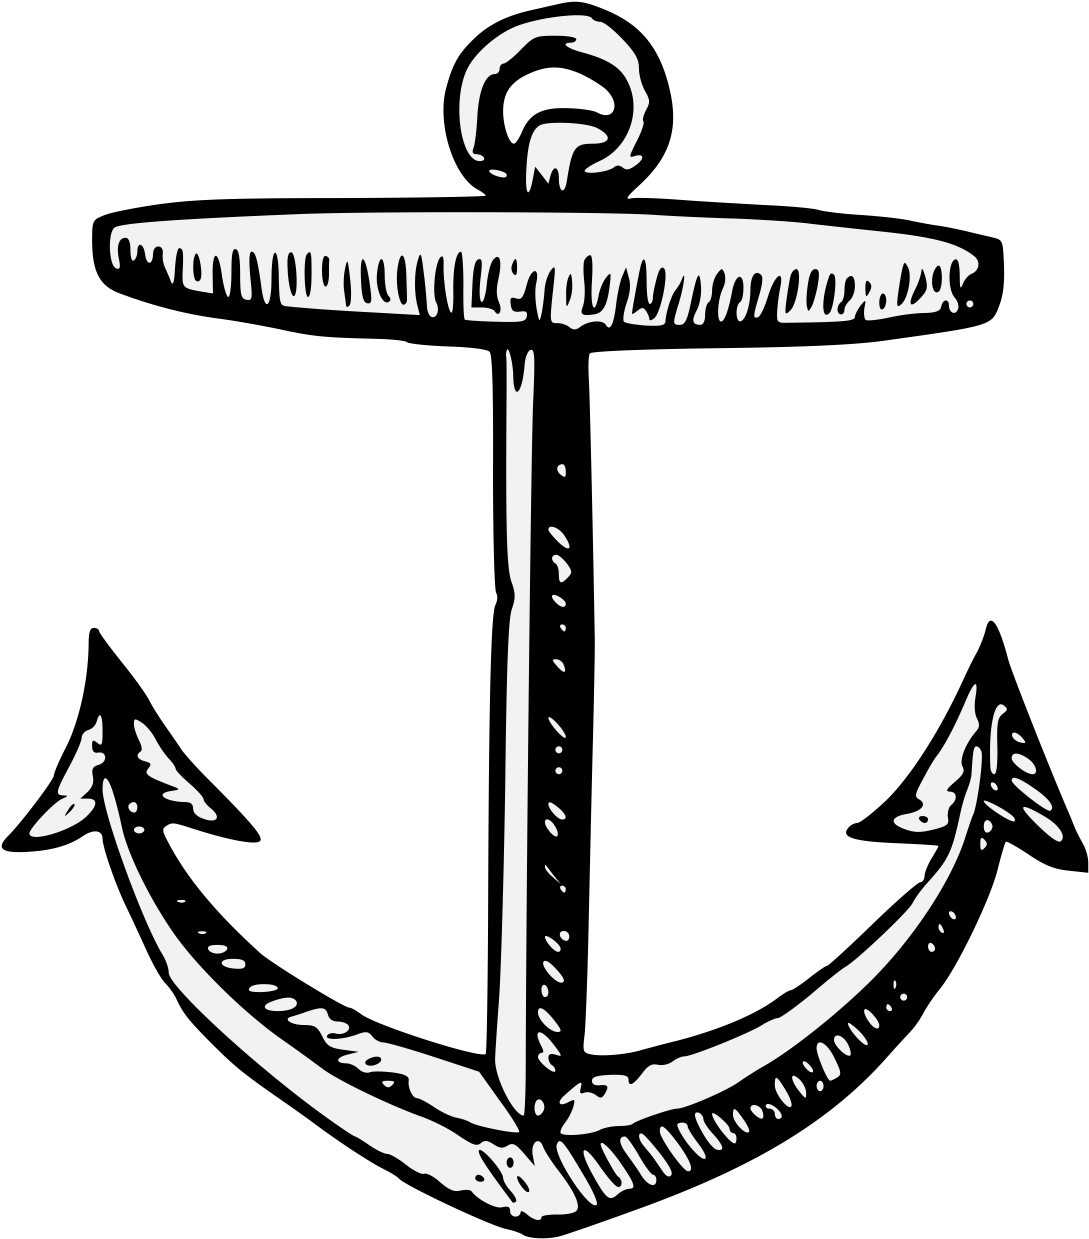 Free Anchor Silhouette Png, Download Free Anchor Silhouette Png png